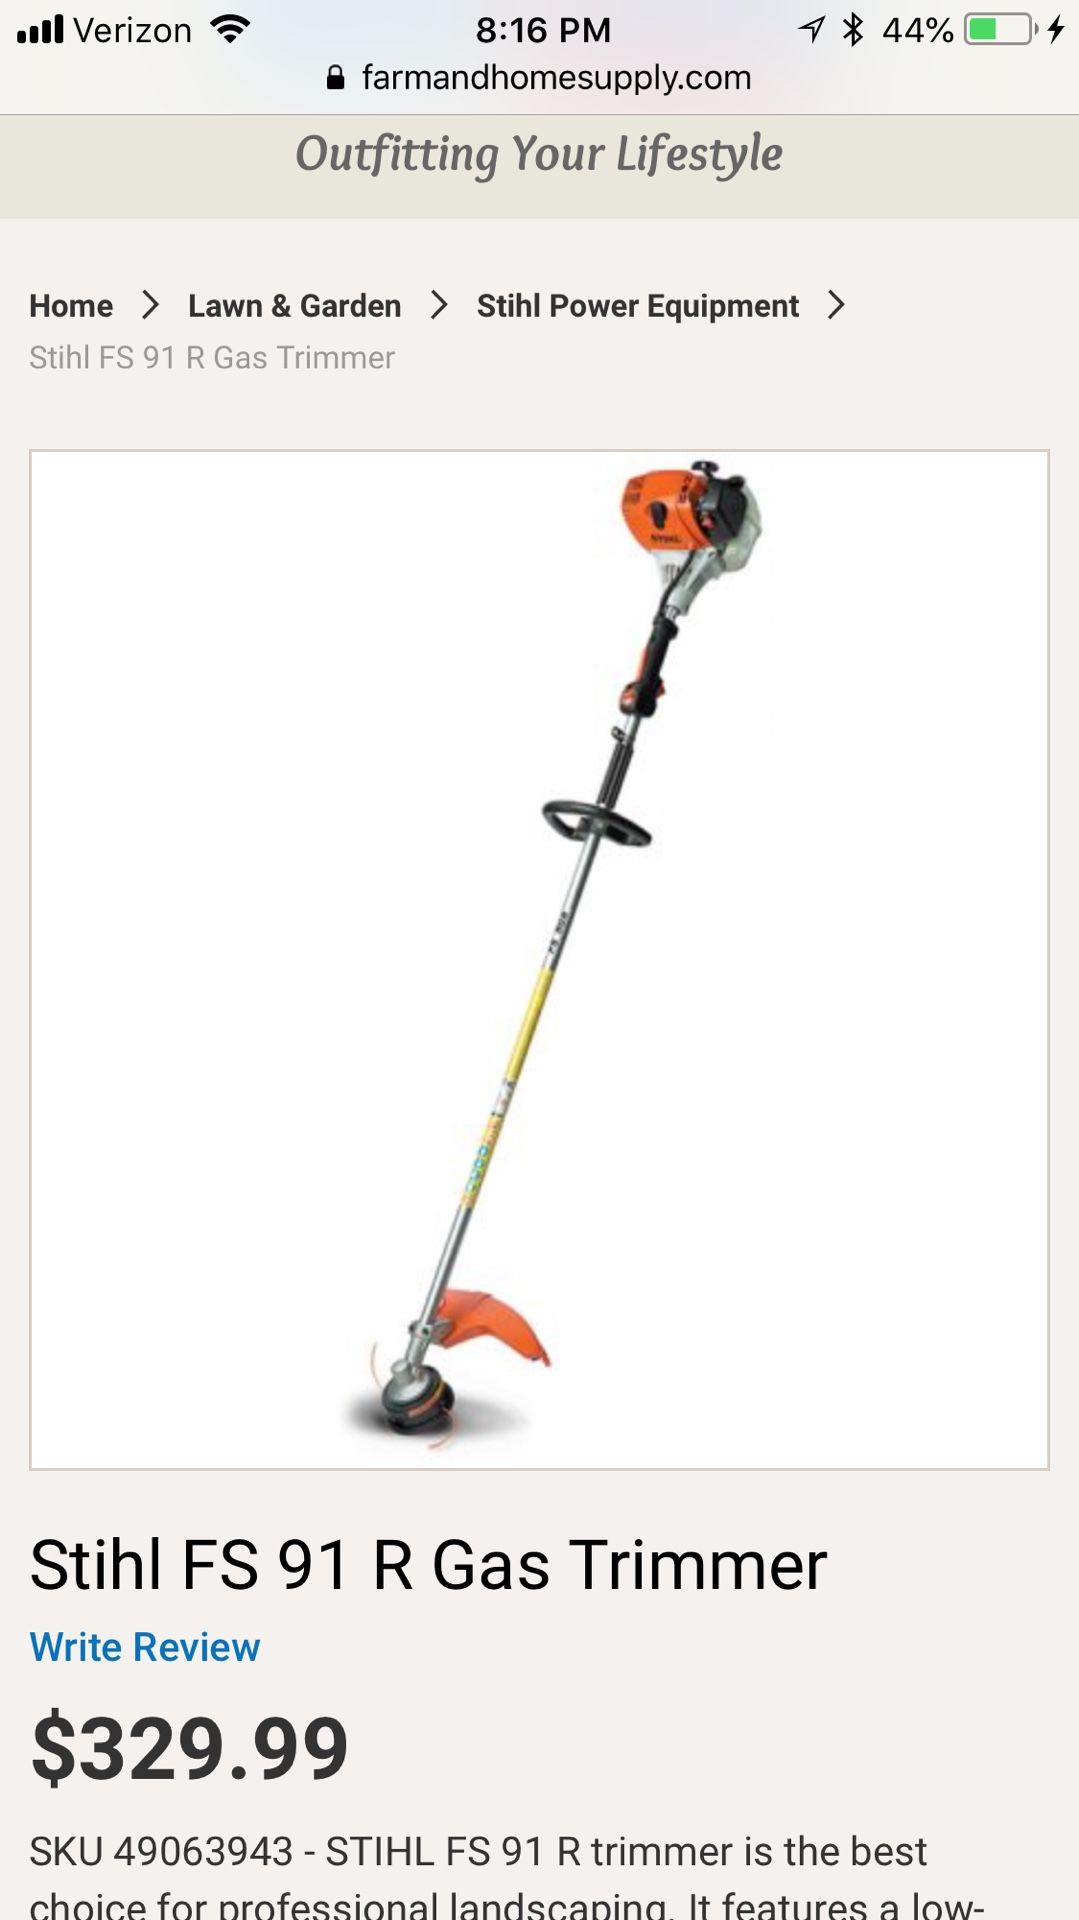 Stihl FS 91 T gas trimmer (weed whacker), retails for $330, you’re for $200 with extras